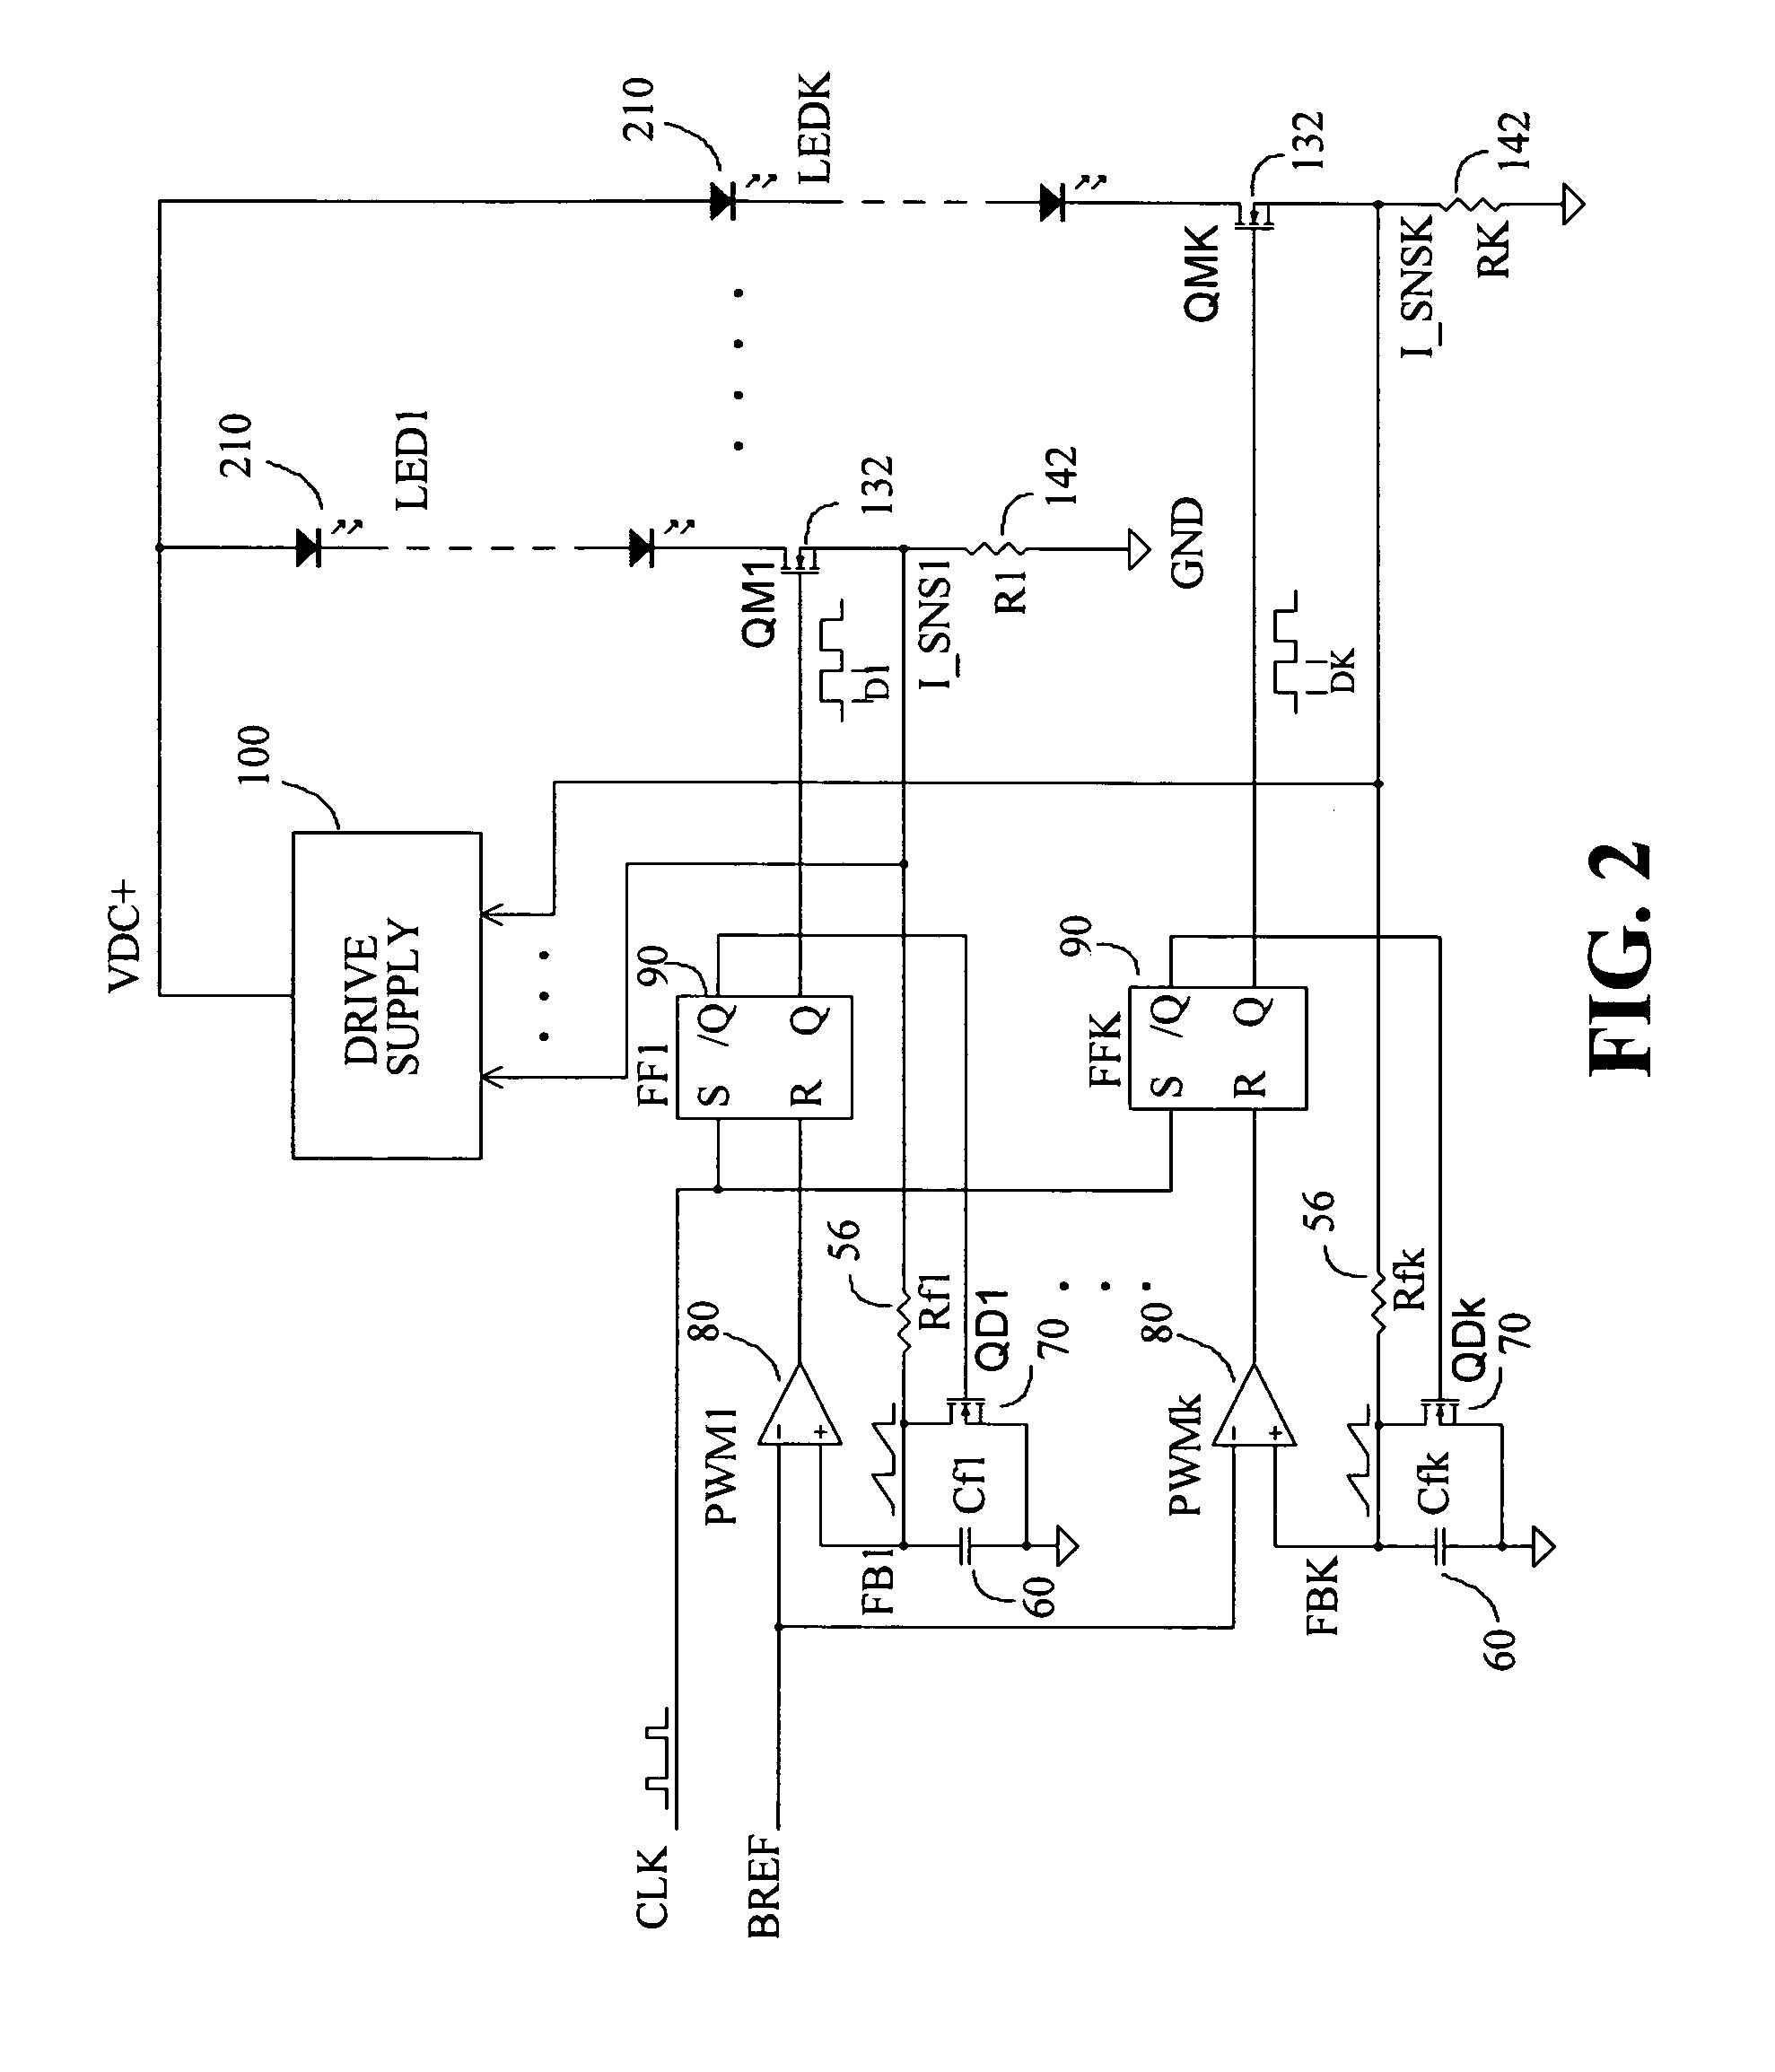 Method and apparatus for driving multiple LED devices